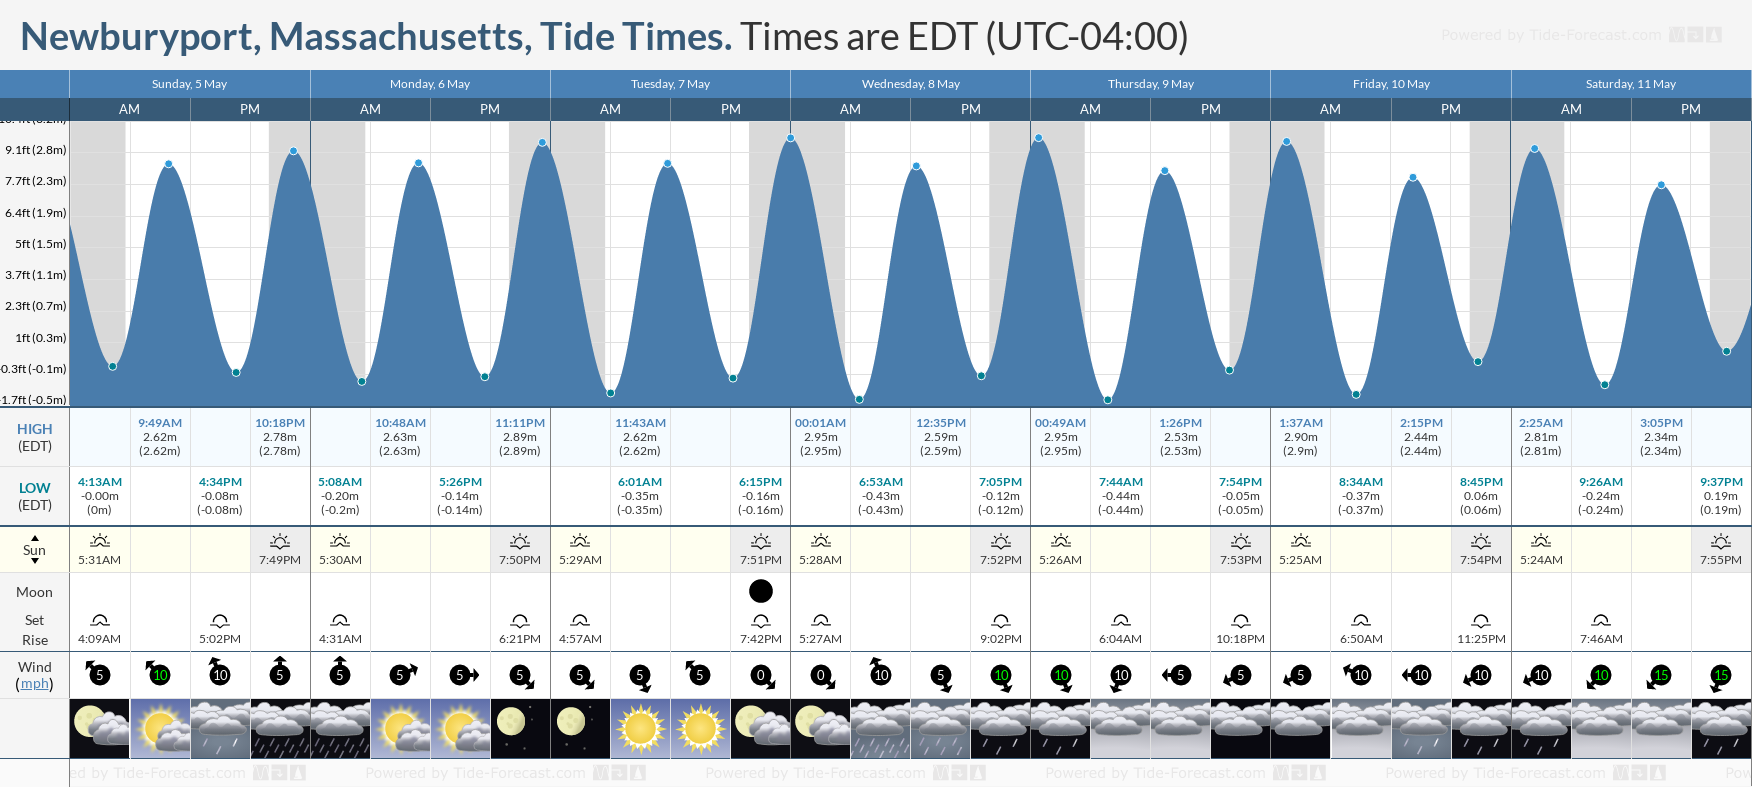 Newburyport, Massachusetts Tide Chart including high and low tide tide times for the next 7 days